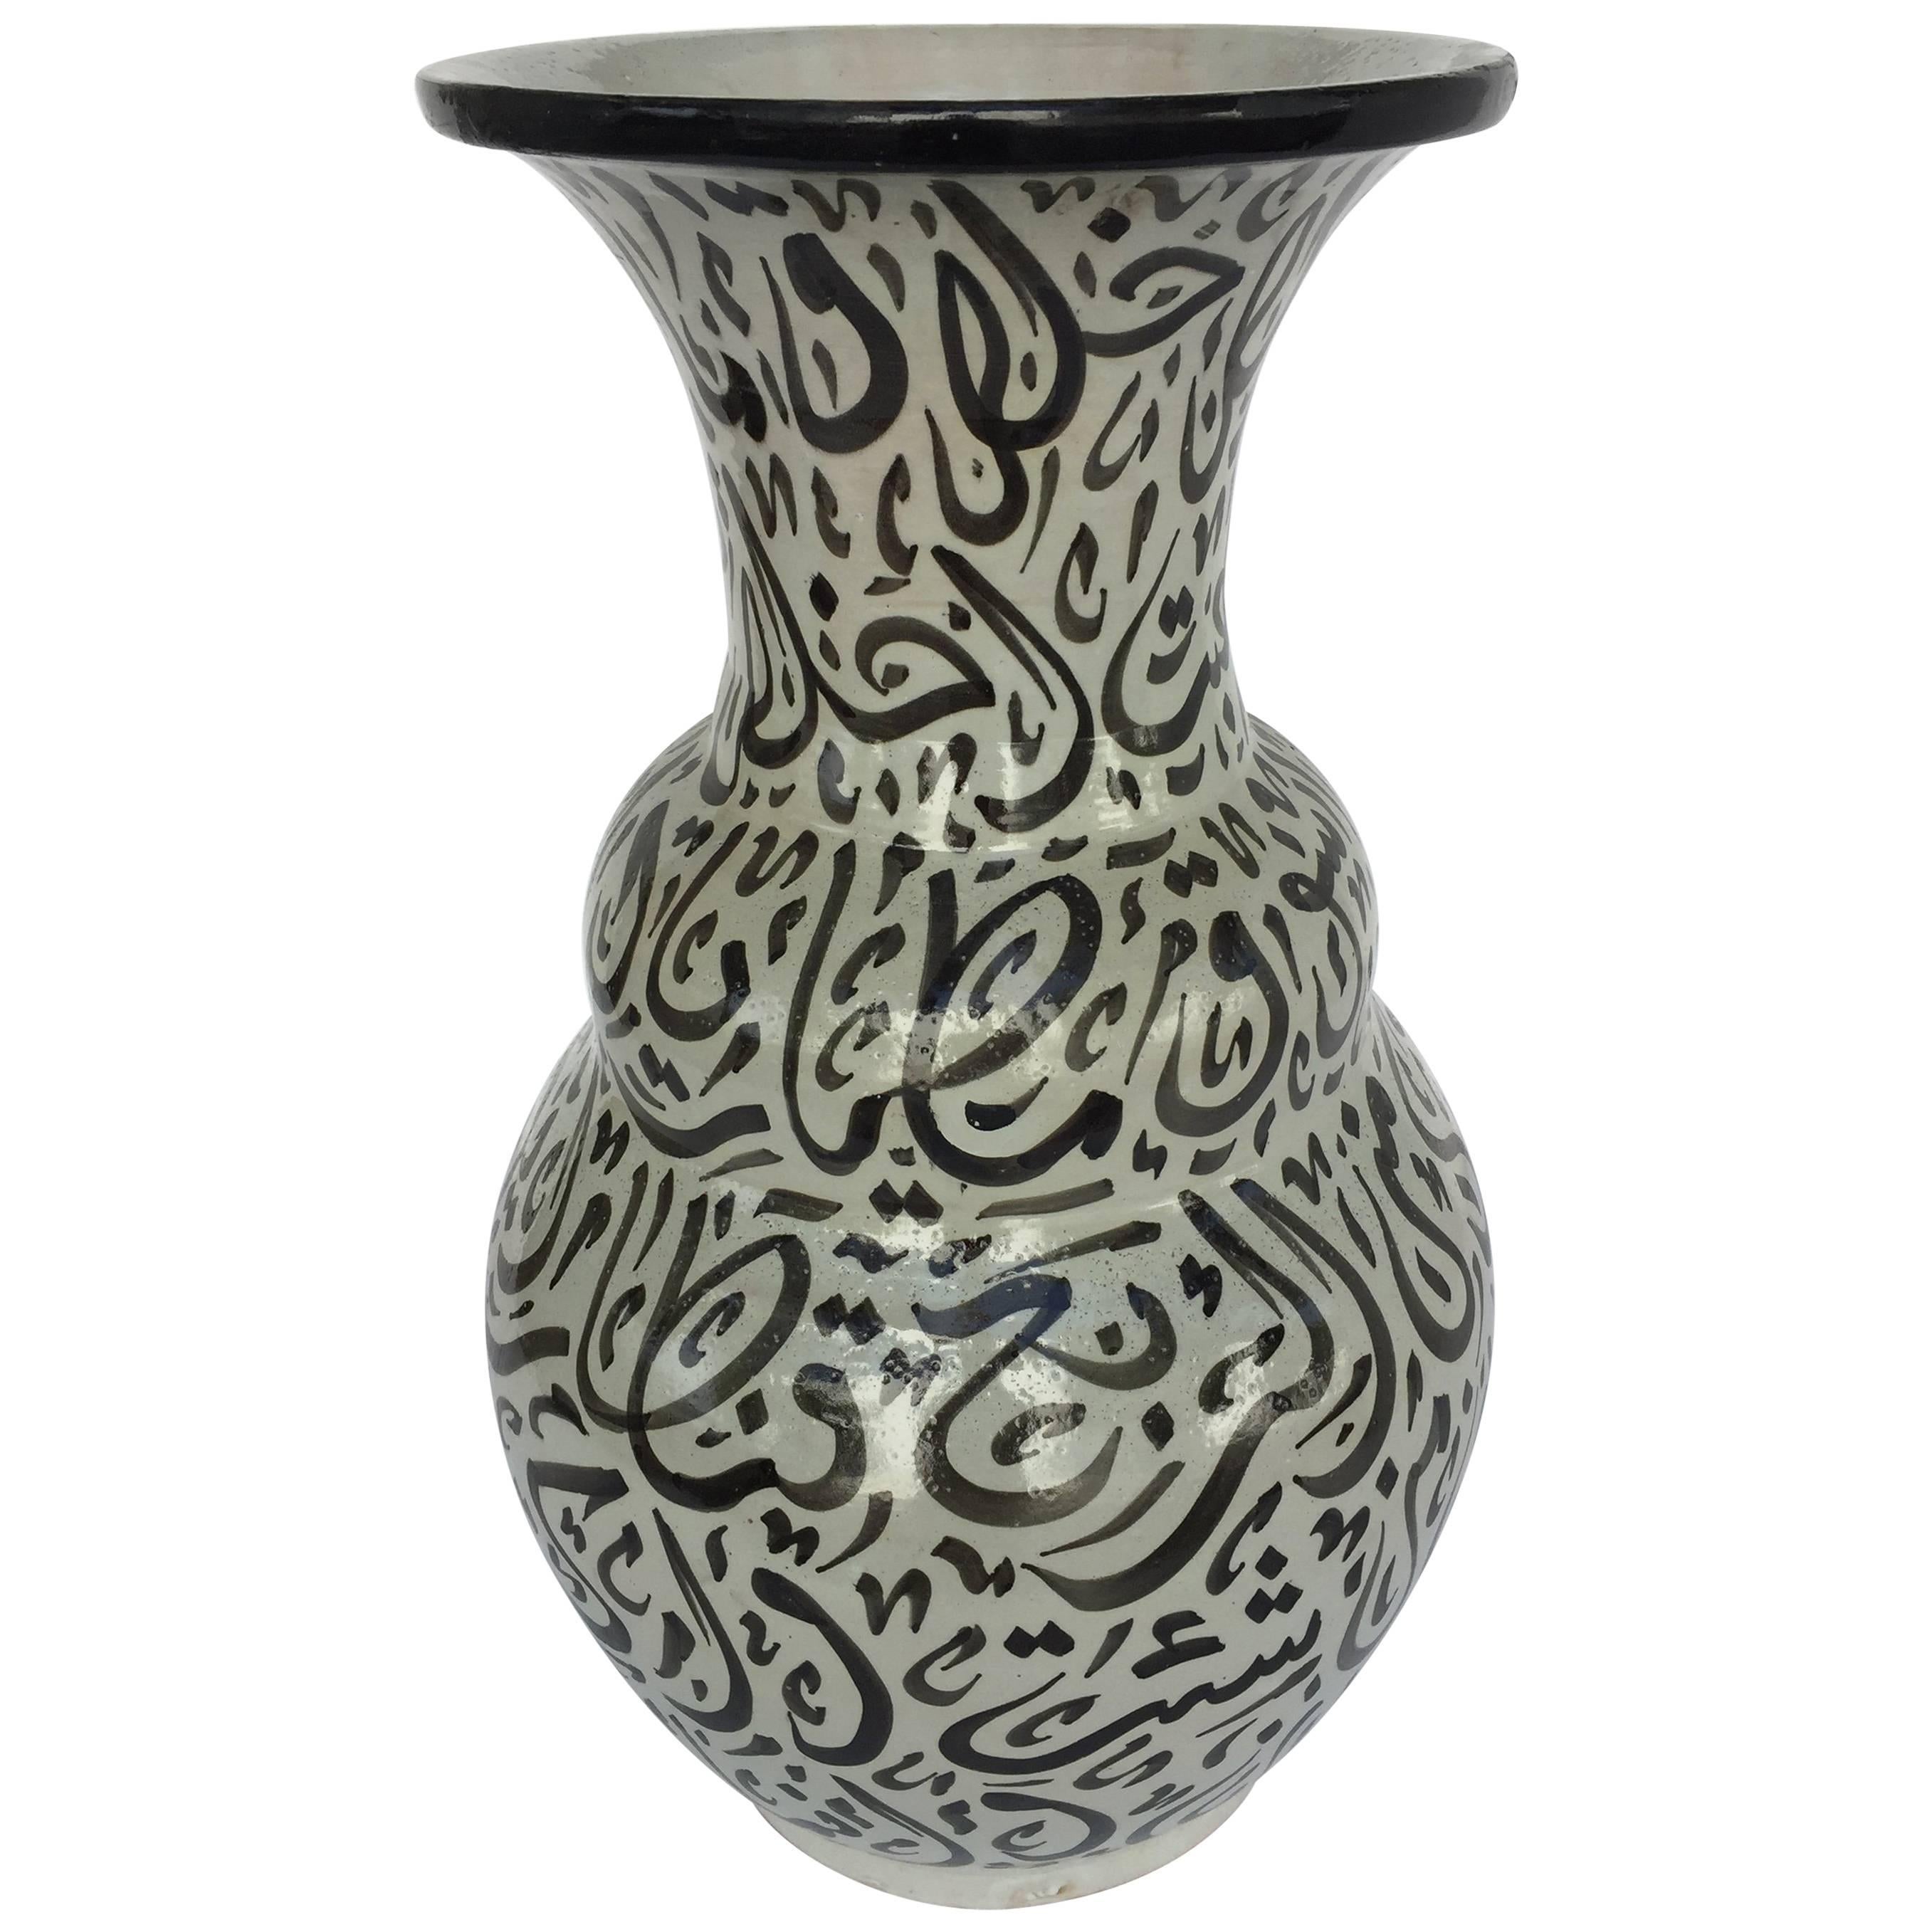 Large Moroccan Glazed Ceramic Vase from Fez with Arabic Calligraphy Writing For Sale